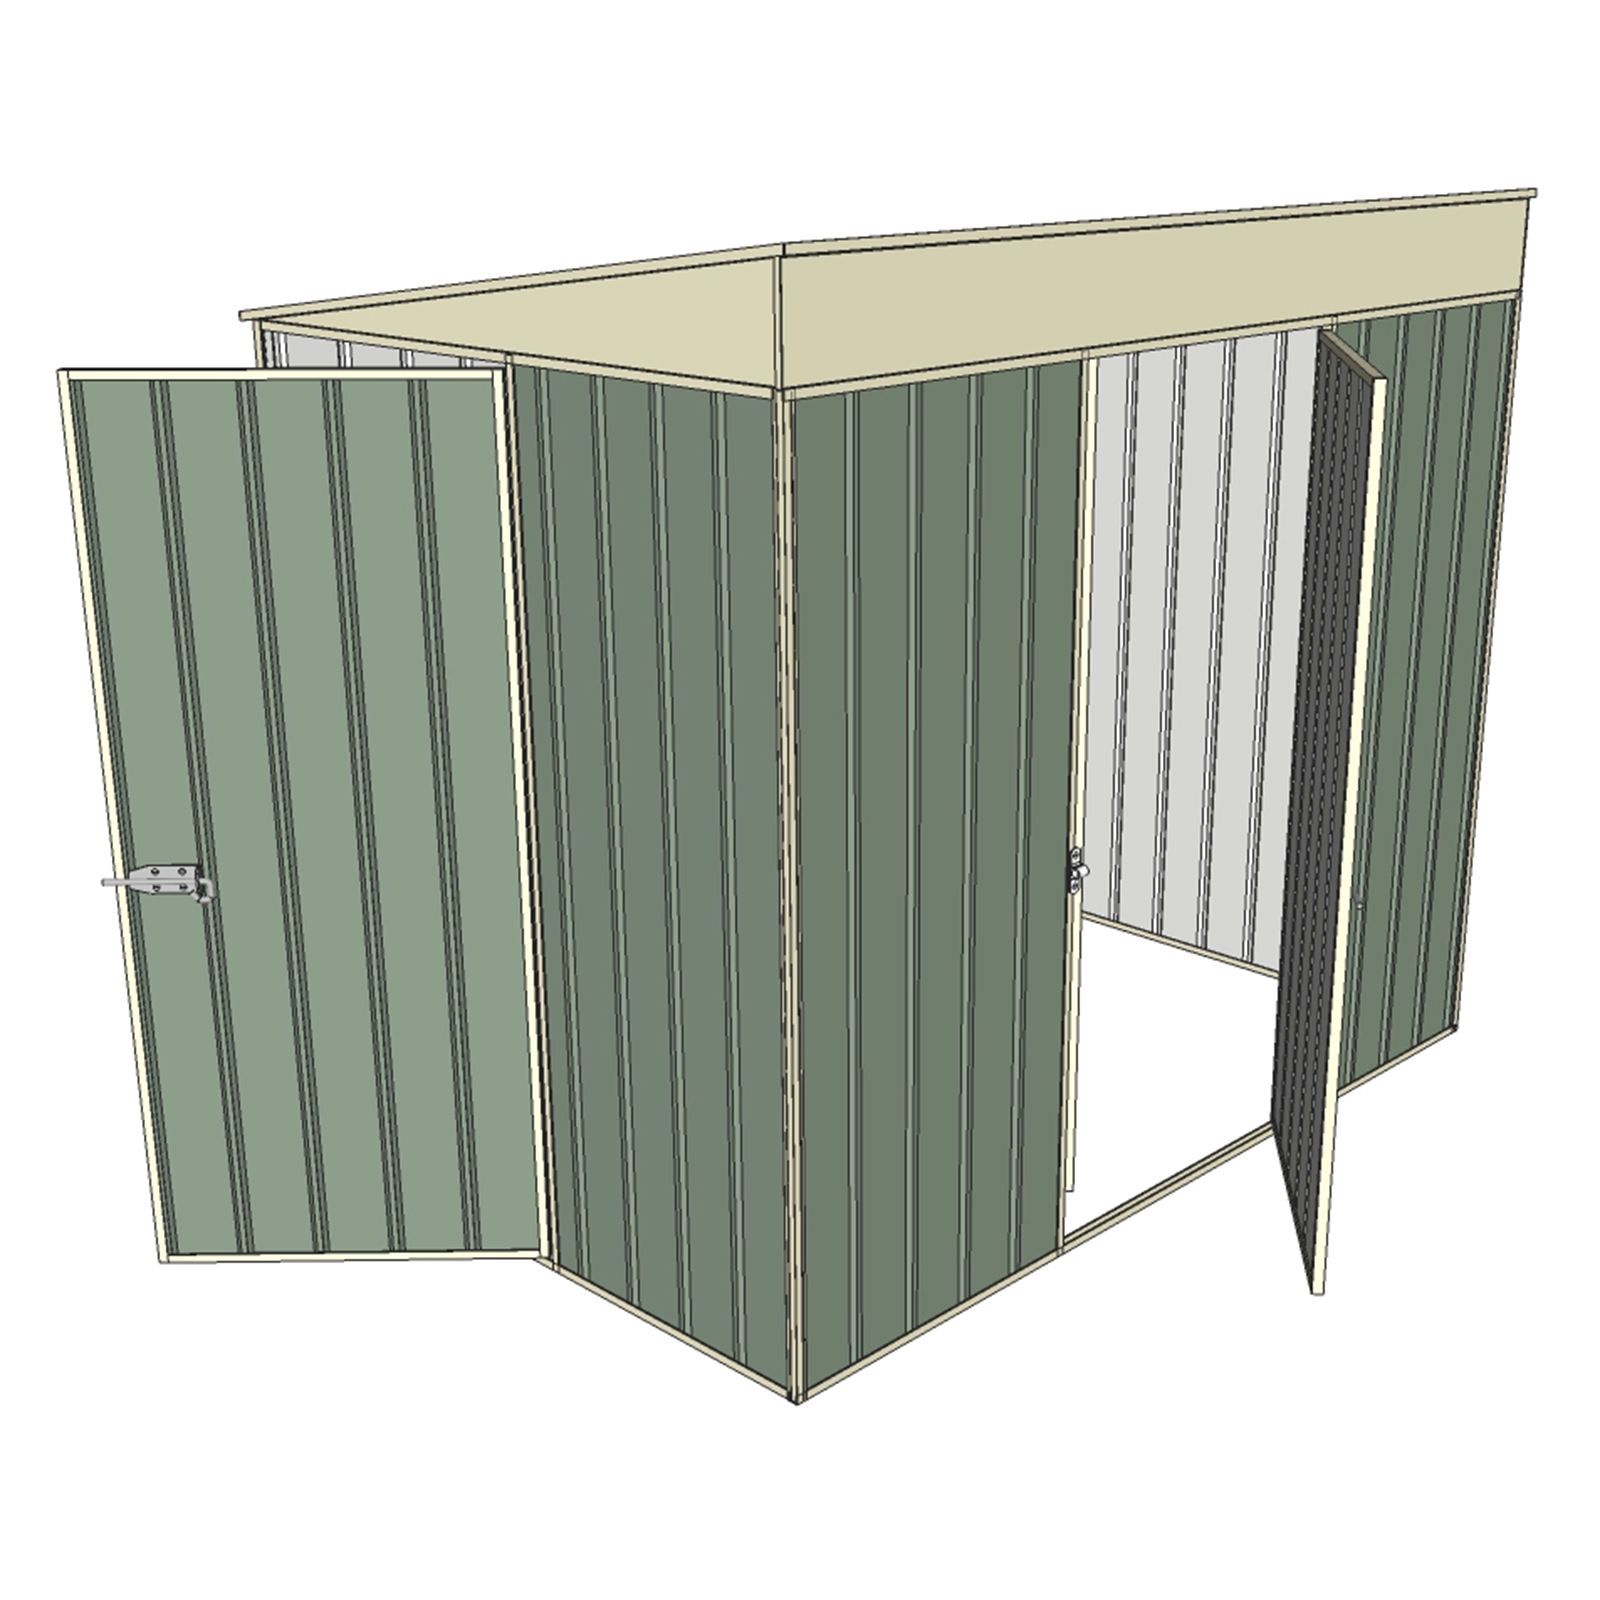 Build-a-Shed 1.5 x 2.0 x 2.3m Green Skillion Two Single Hinged Doors Narrow Shed